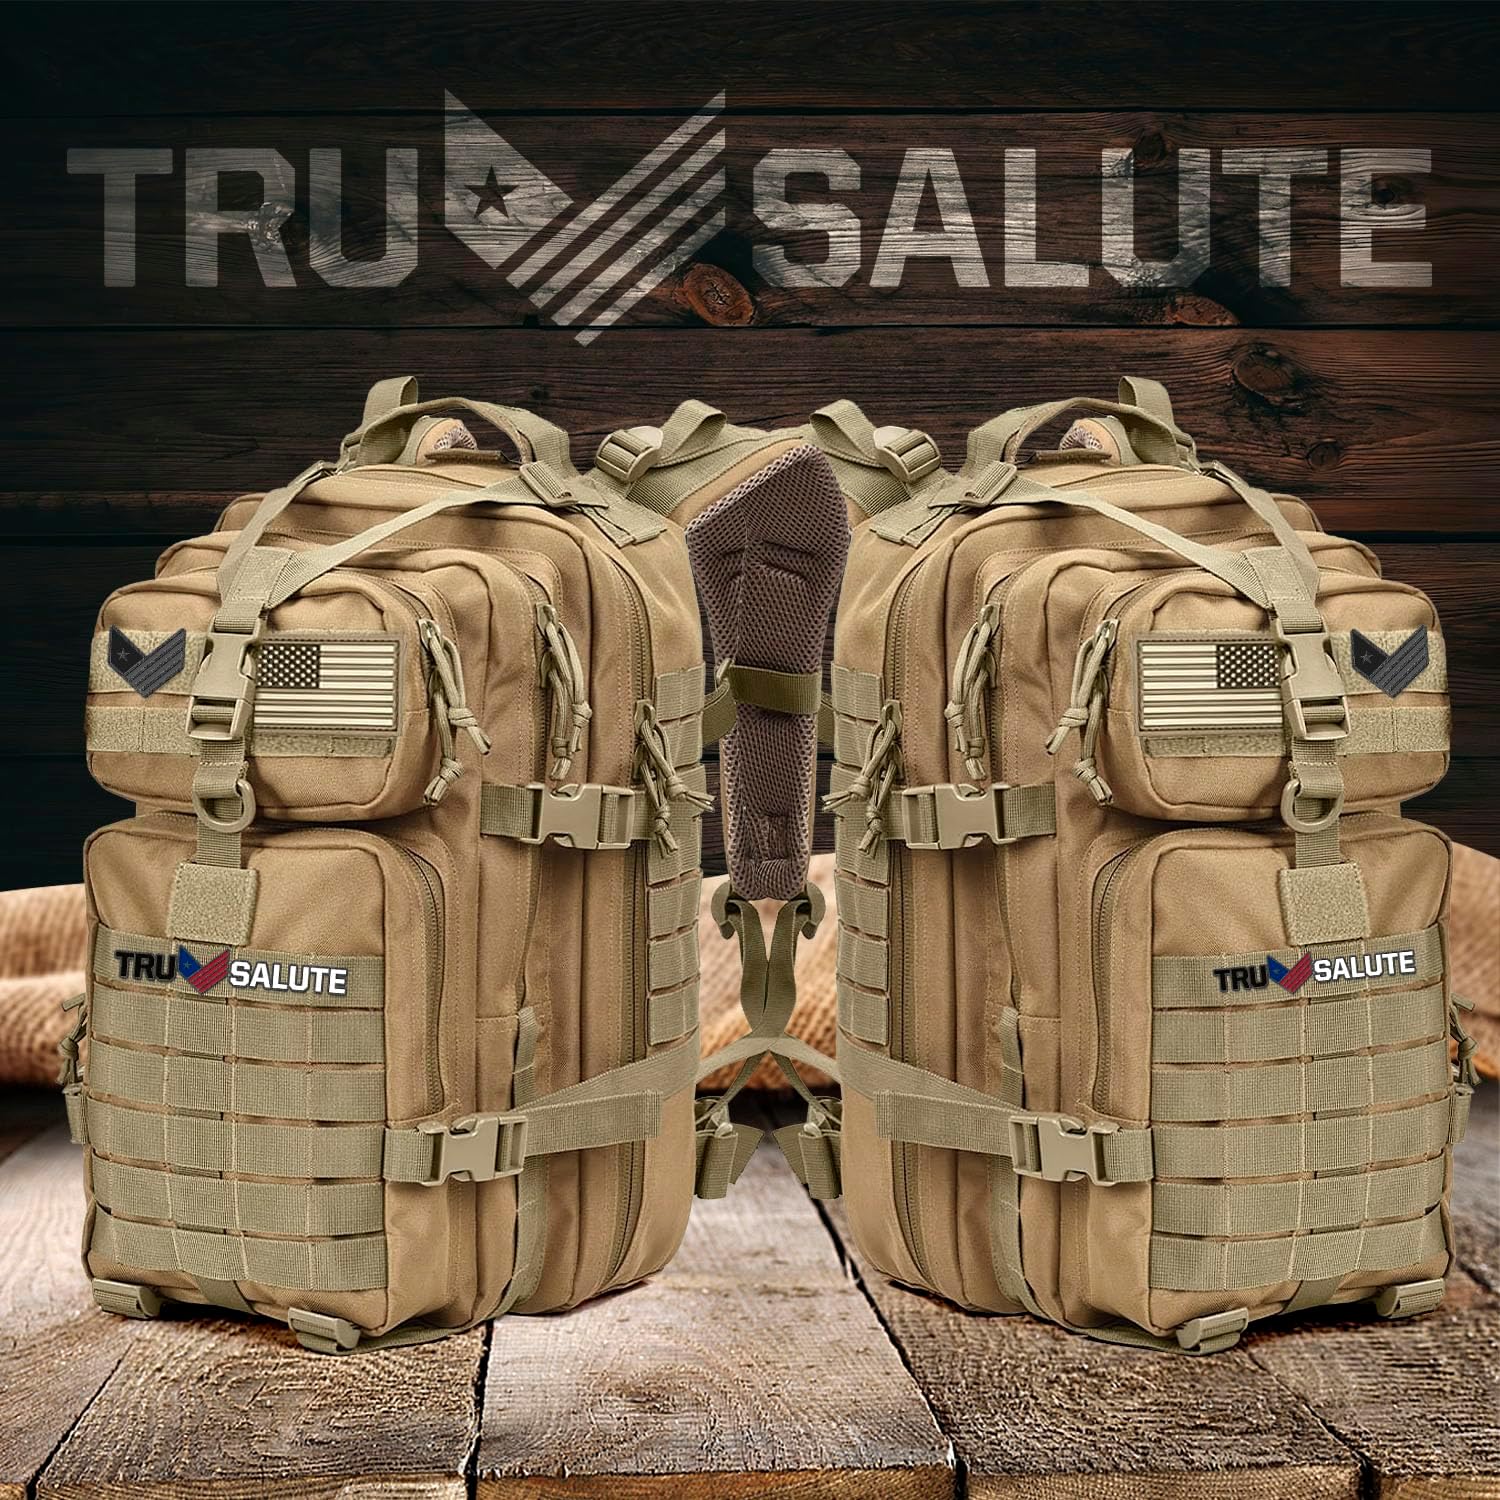 Tru Salute 40L Military Tactical Backpack Large Army 3 Day Assault Pack Molle Bugout Bag Rucksack (Tan)